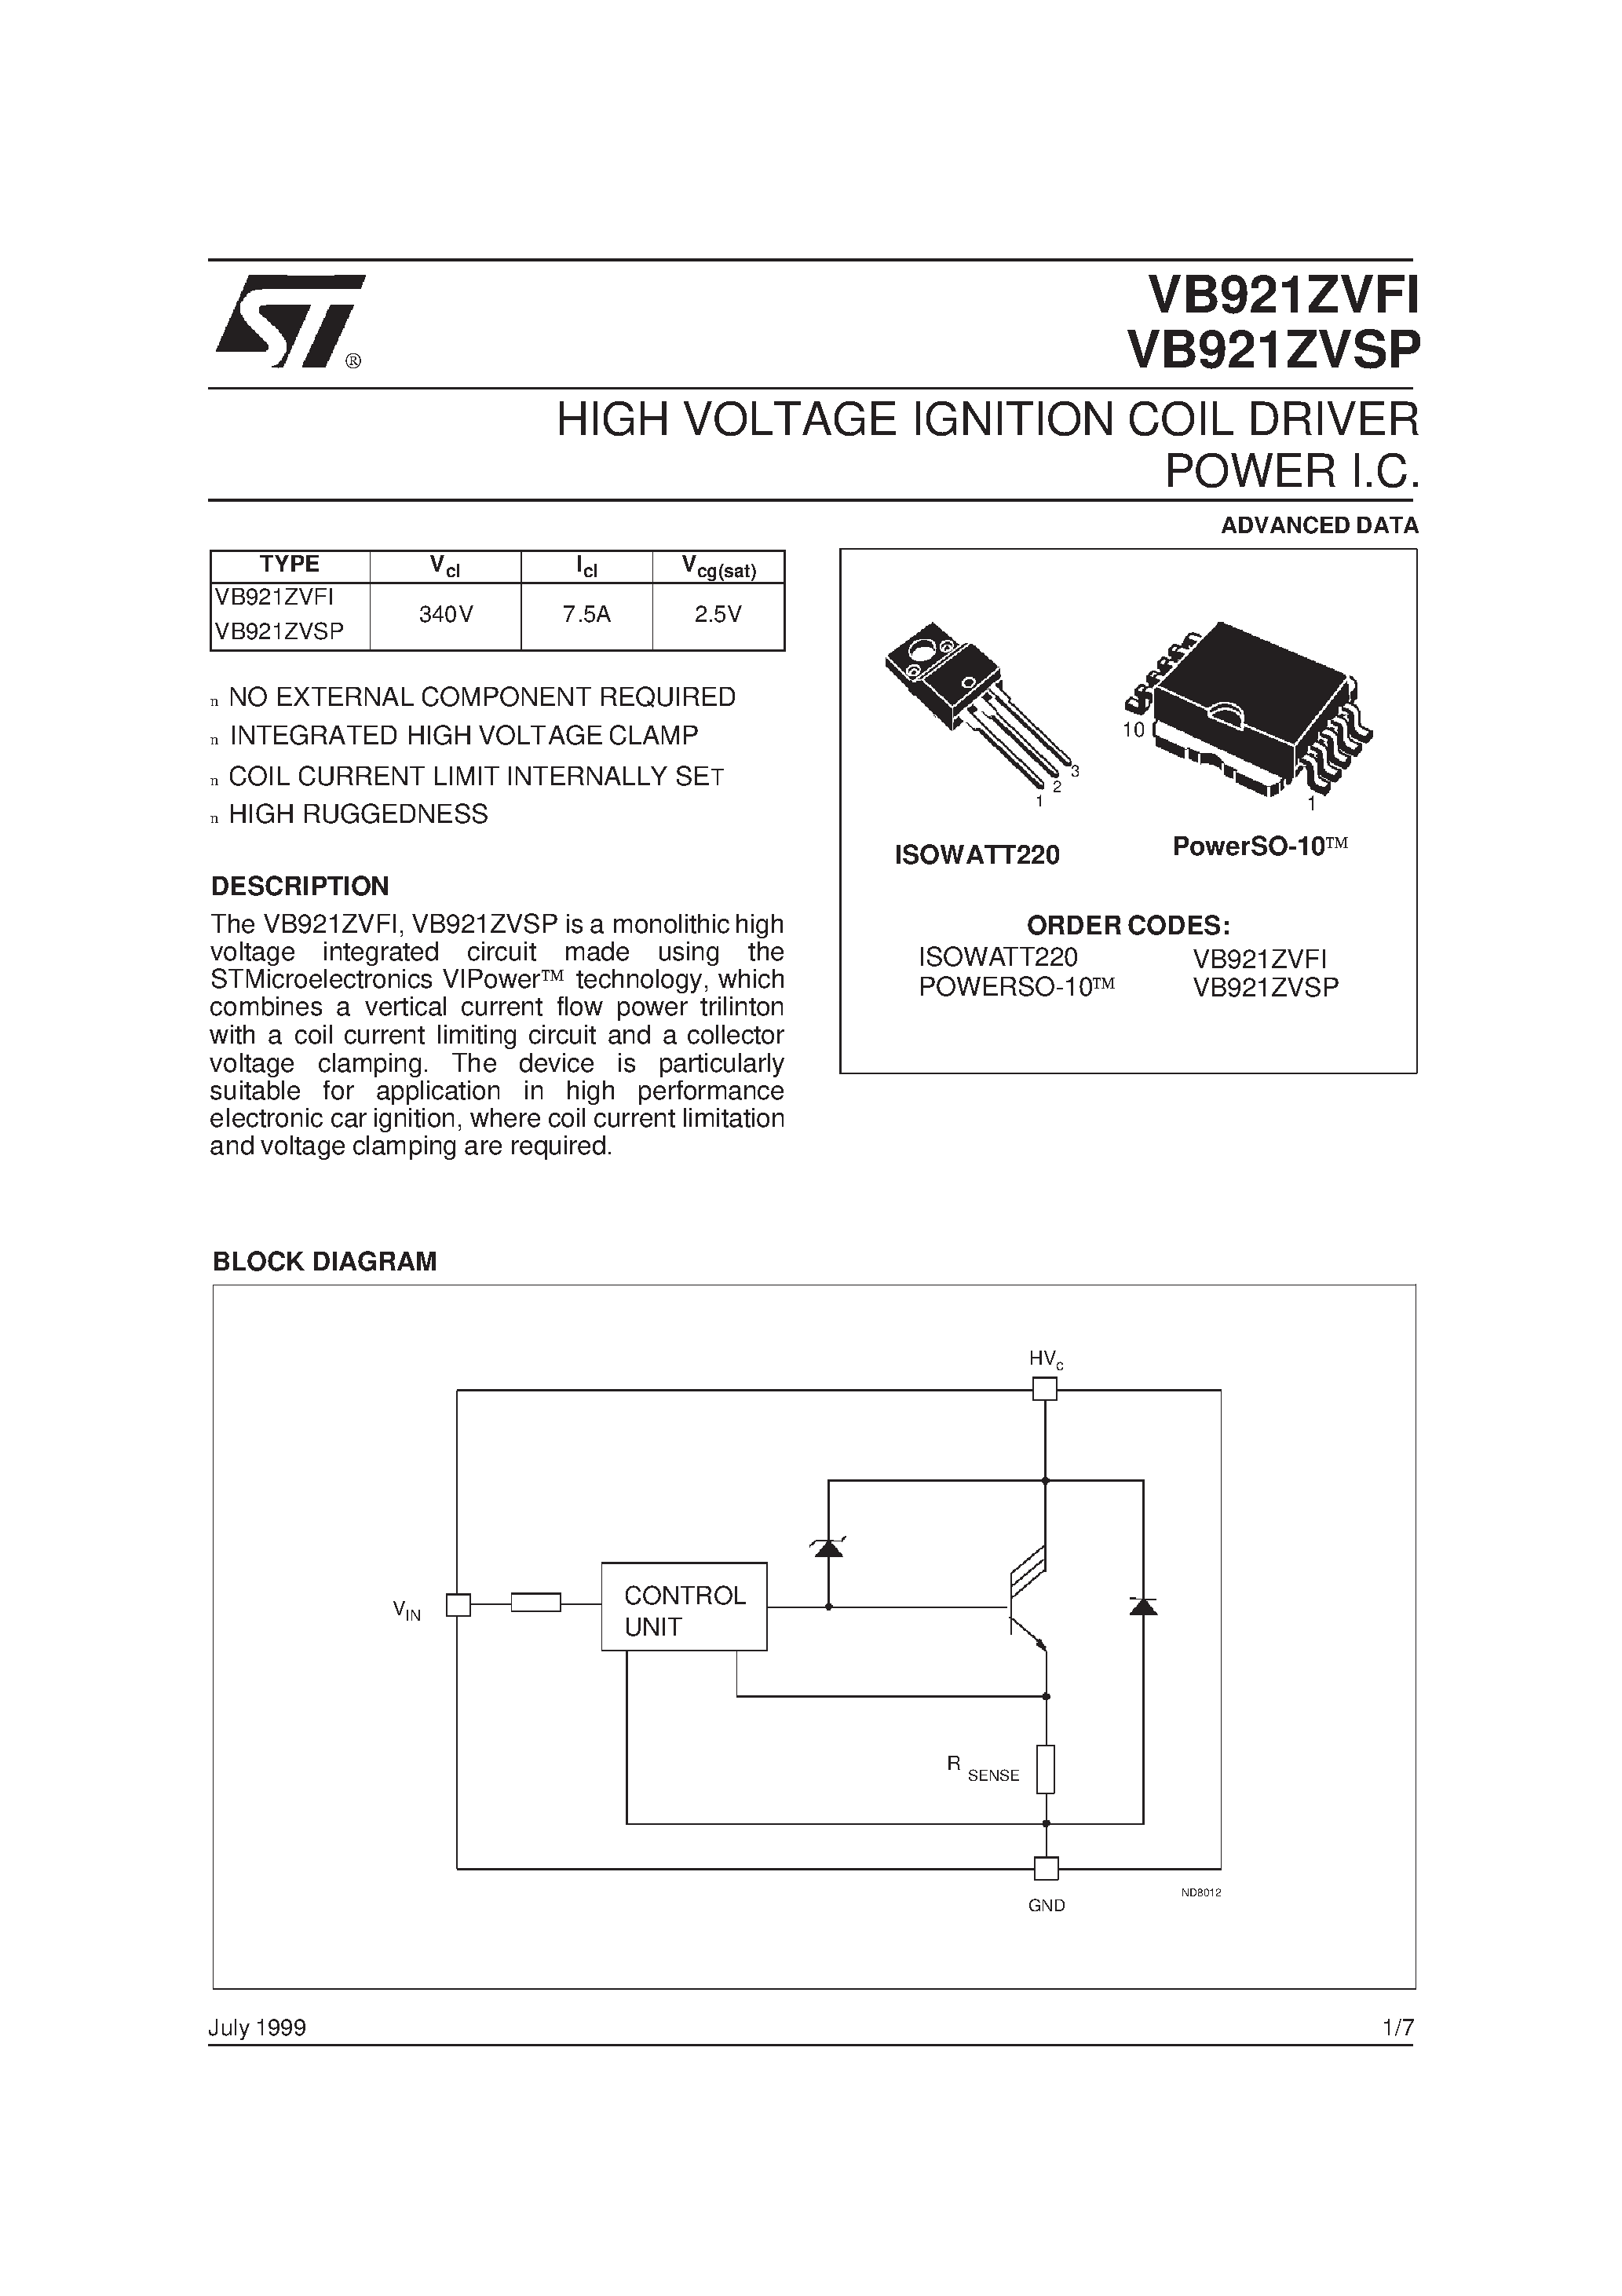 Datasheet VB921ZVSP - HIGH VOLTAGE IGNITION COIL DRIVER POWER I.C. page 1